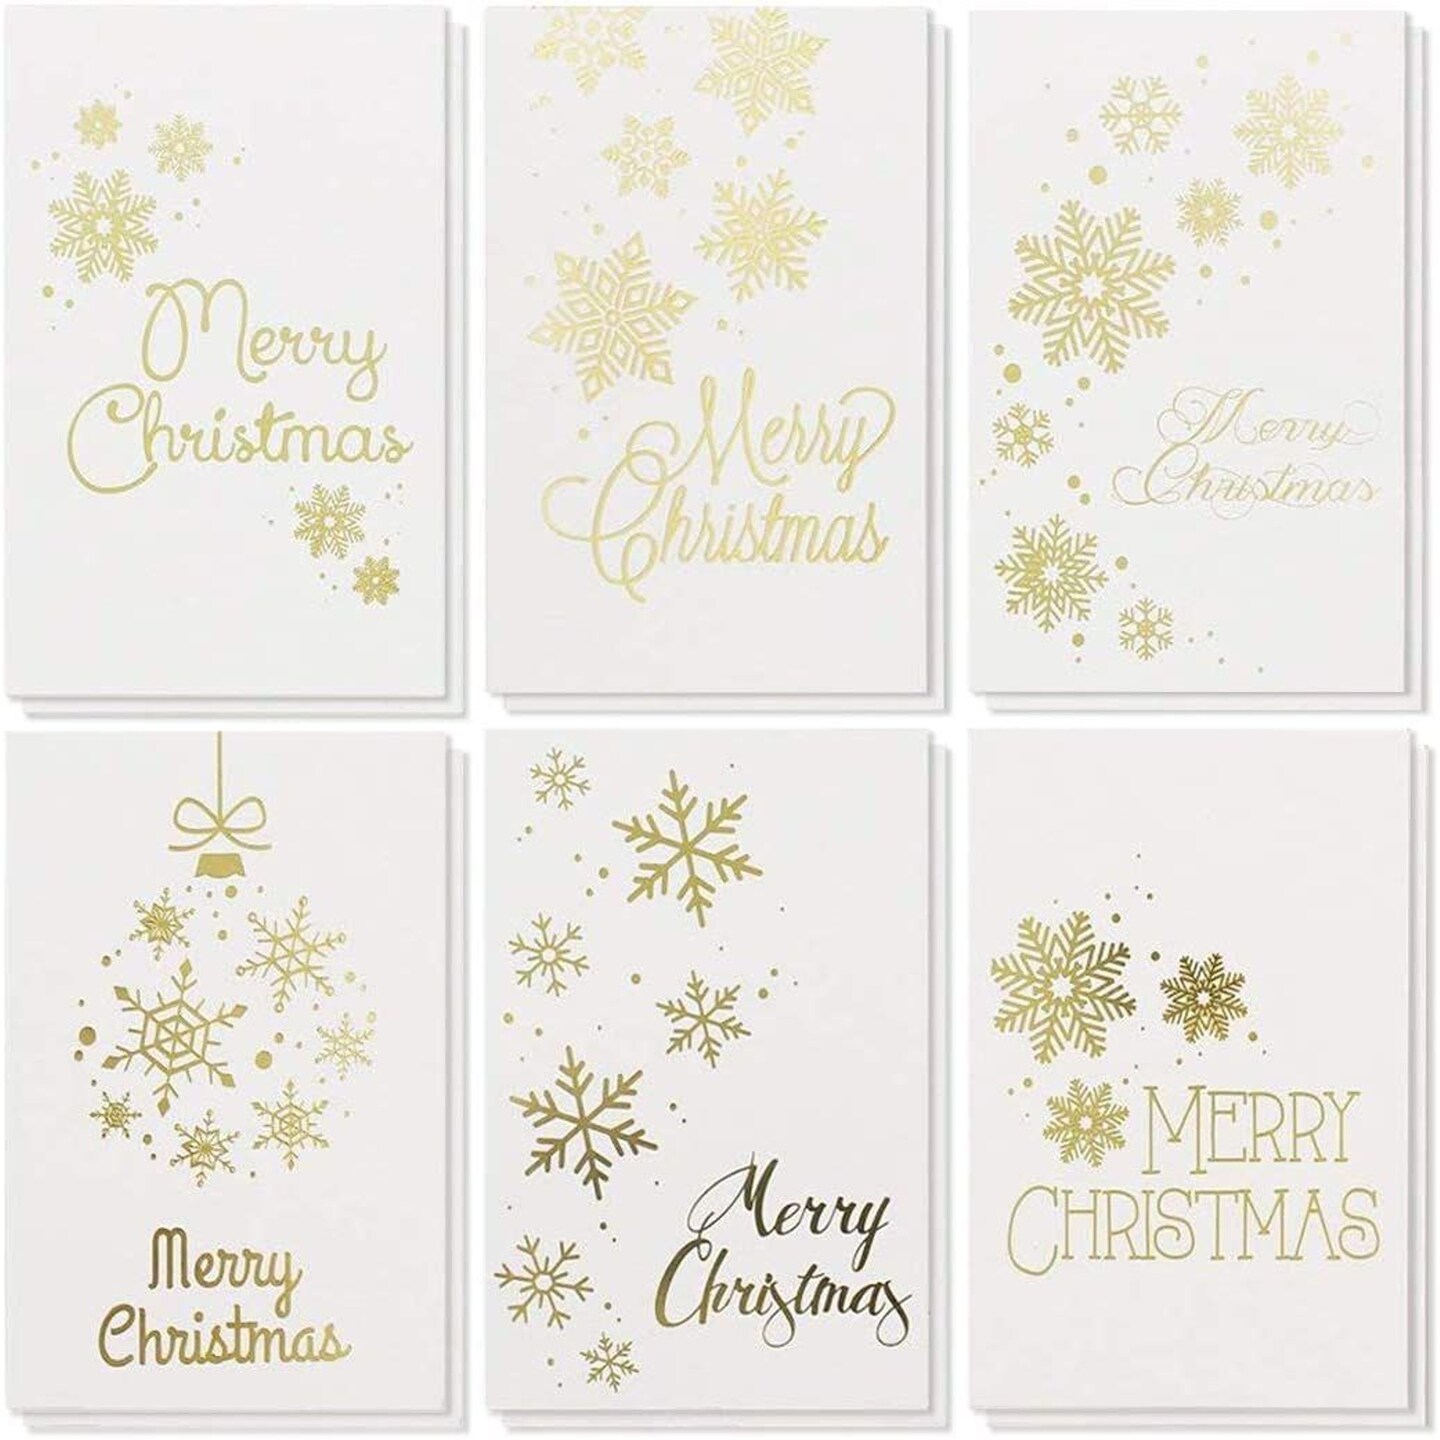 48 Pack Merry Christmas Greetings Cards with Envelopes Set, 6 Festive Gold Foil Snowflakes Designs (4 x 6 In)